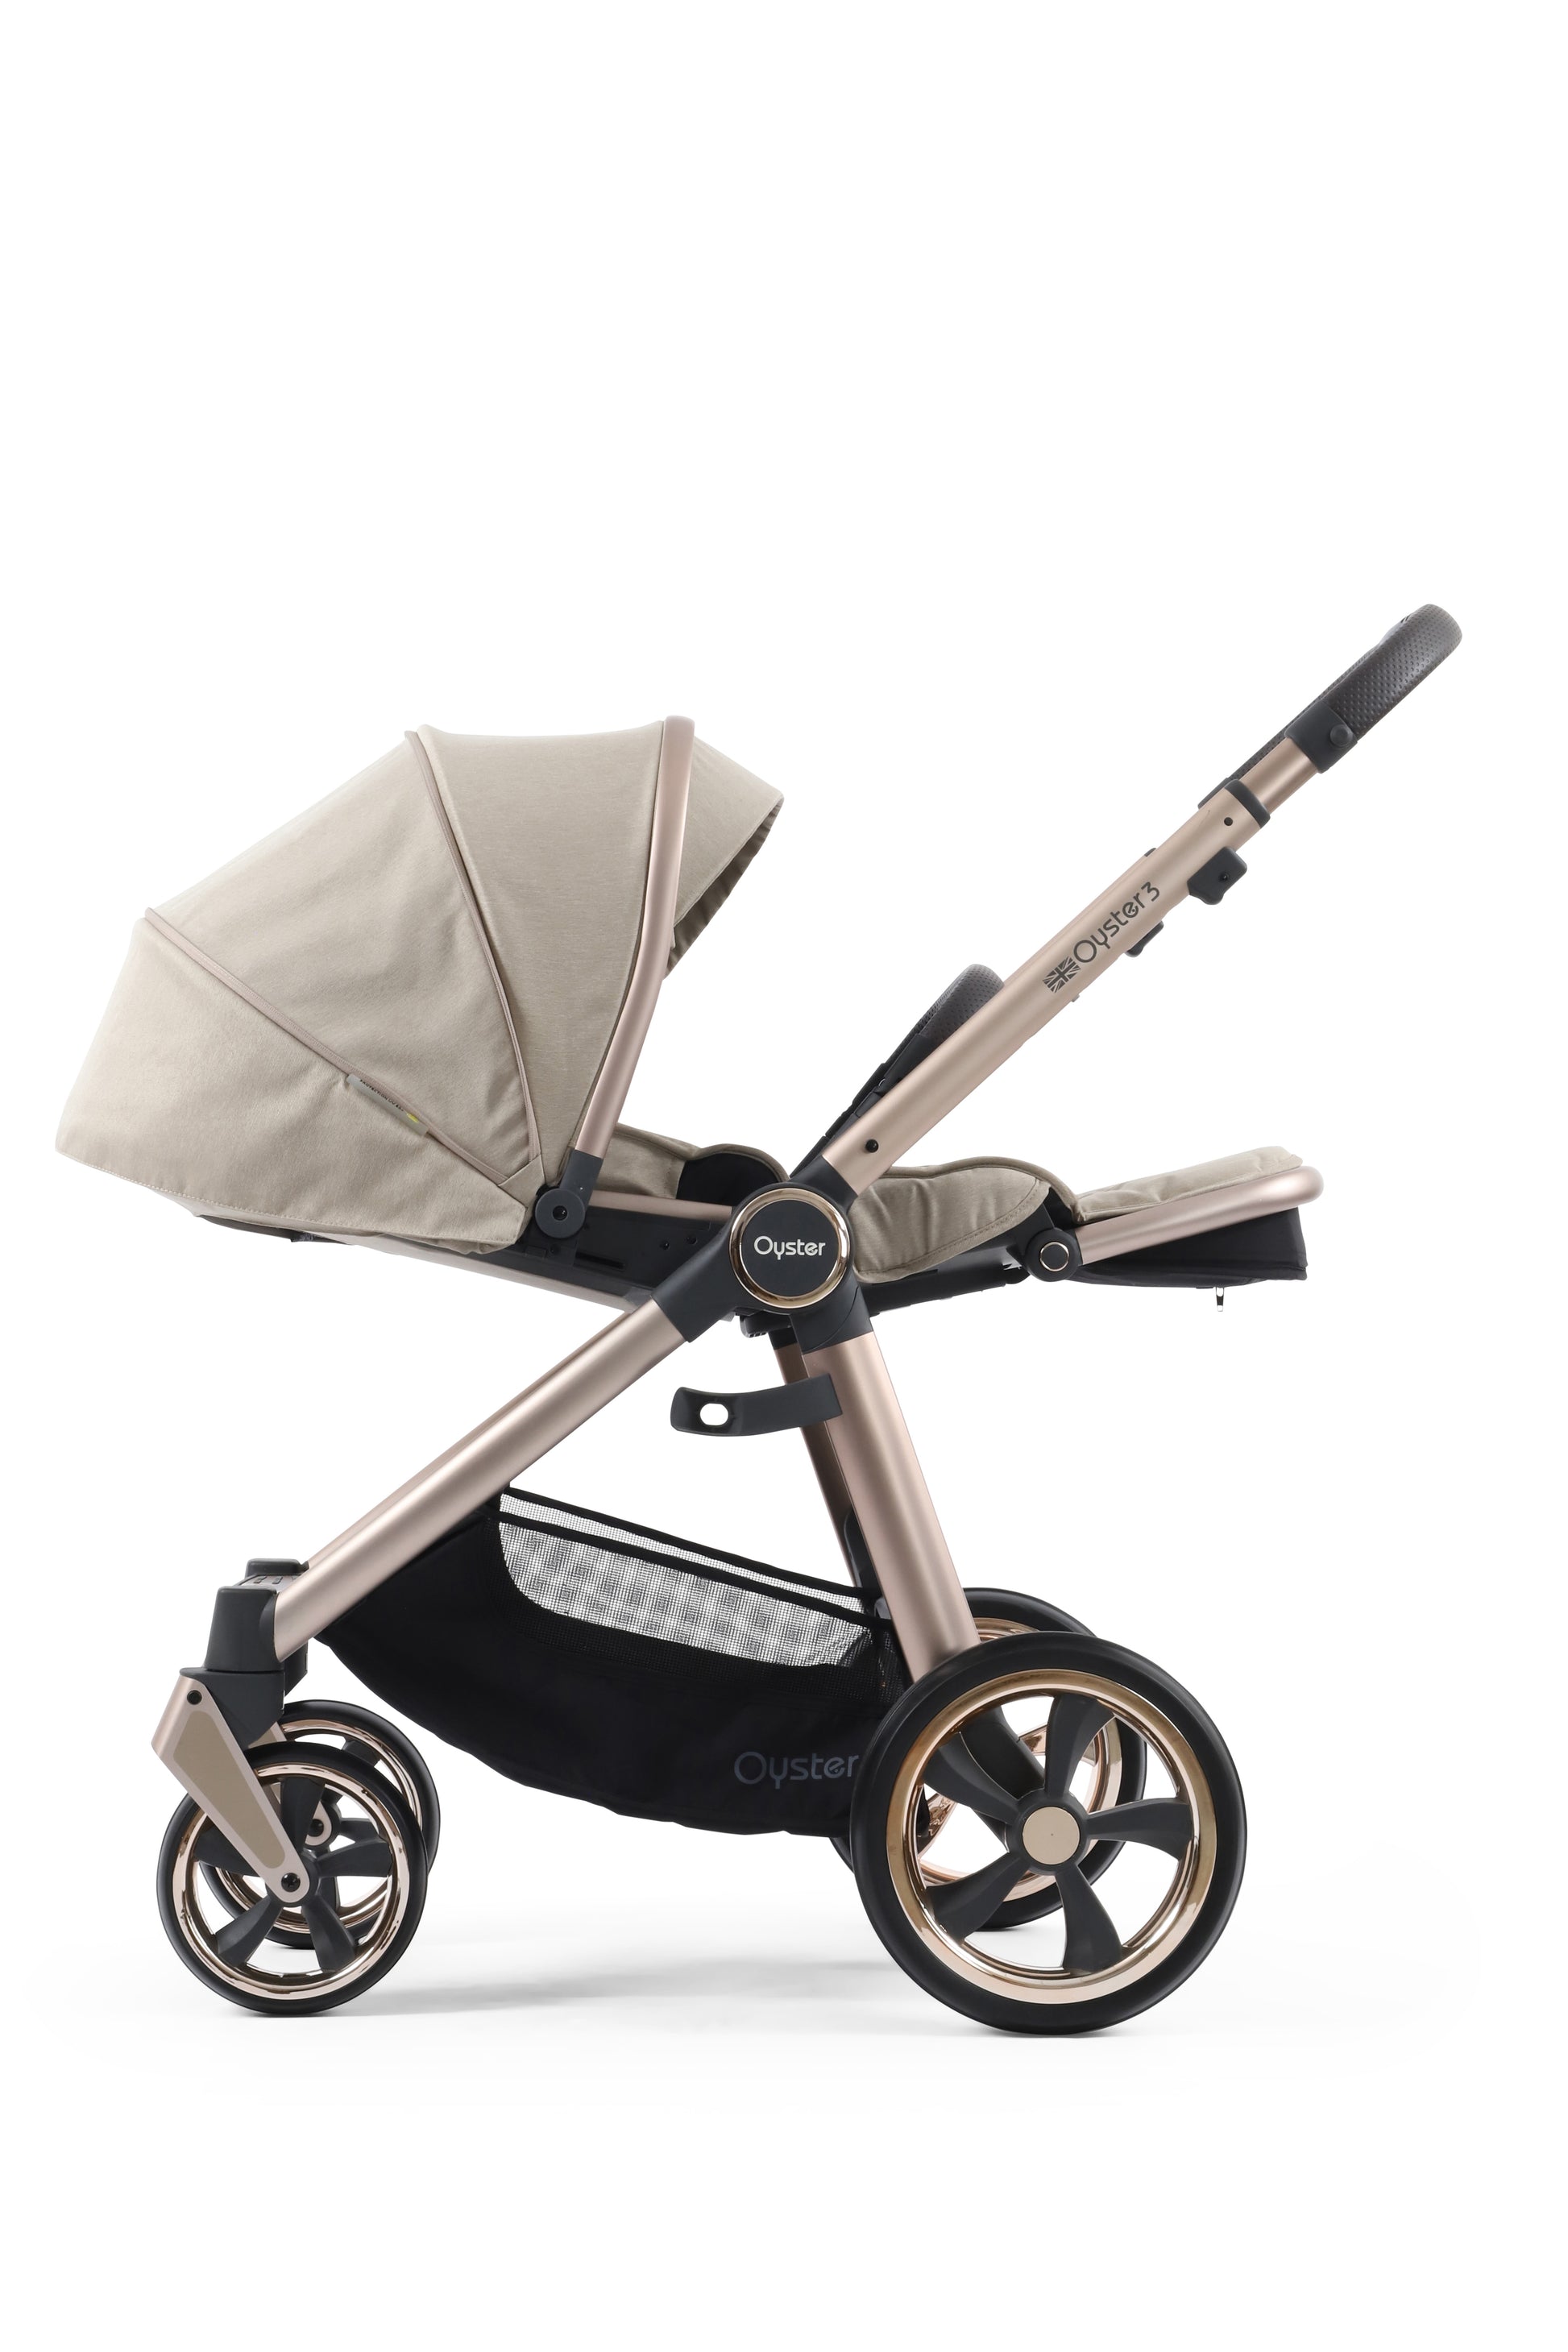 Oyster 3 Luxury 7 Piece Maxi Cosi Pebble Pro 360 Travel System | Crème Brulee (Champagne Chassis)